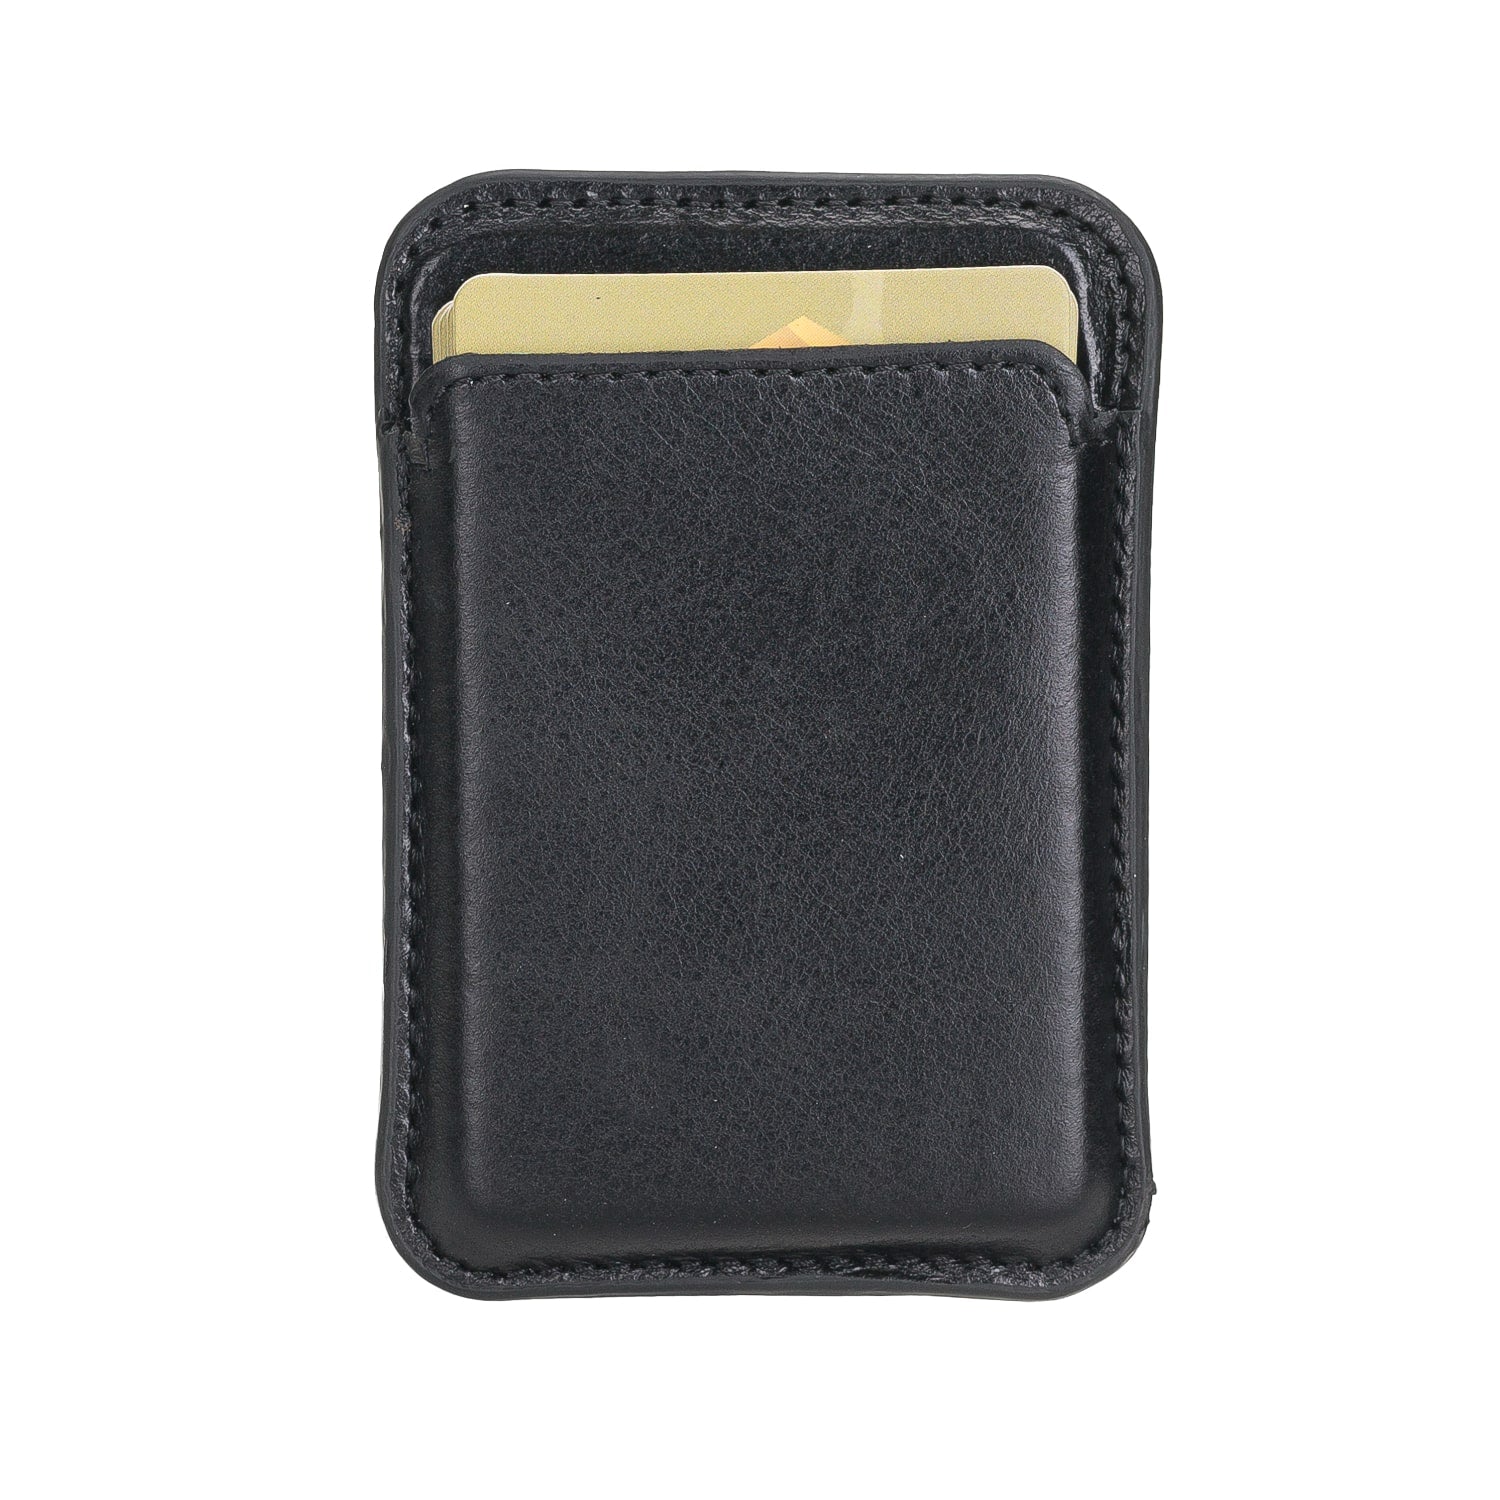 Black Leather Apple MagSafe Card Holder Magnetic Wallet for iPhone - Bomonti - 4